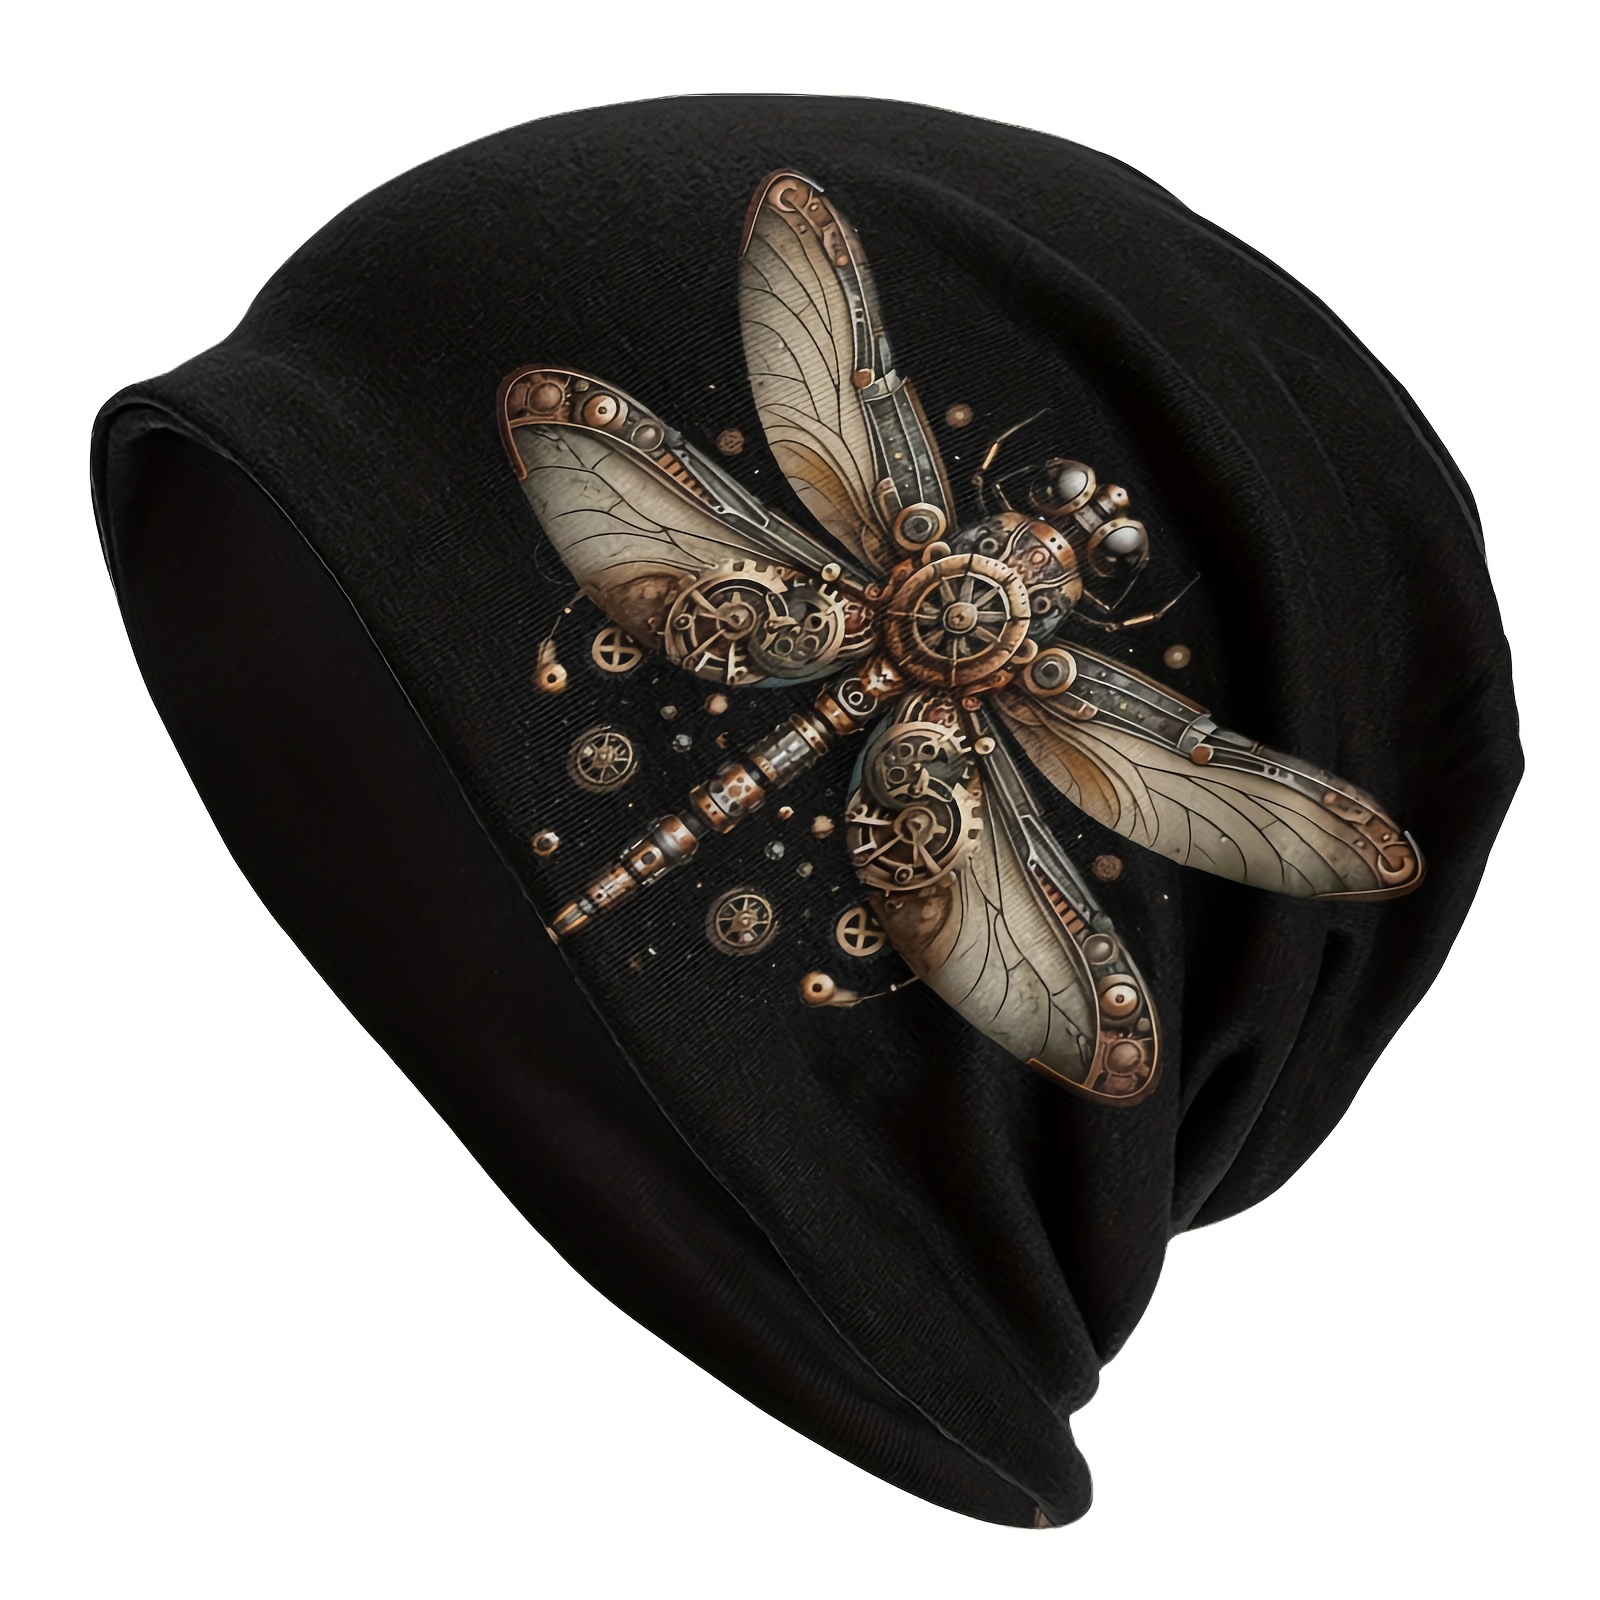 

Steampunk Style Dragonfly Beanie Hat - Thin And Soft Bonnet Cap For Men And Women - Ideal Gift Choice For Sports Enthusiasts